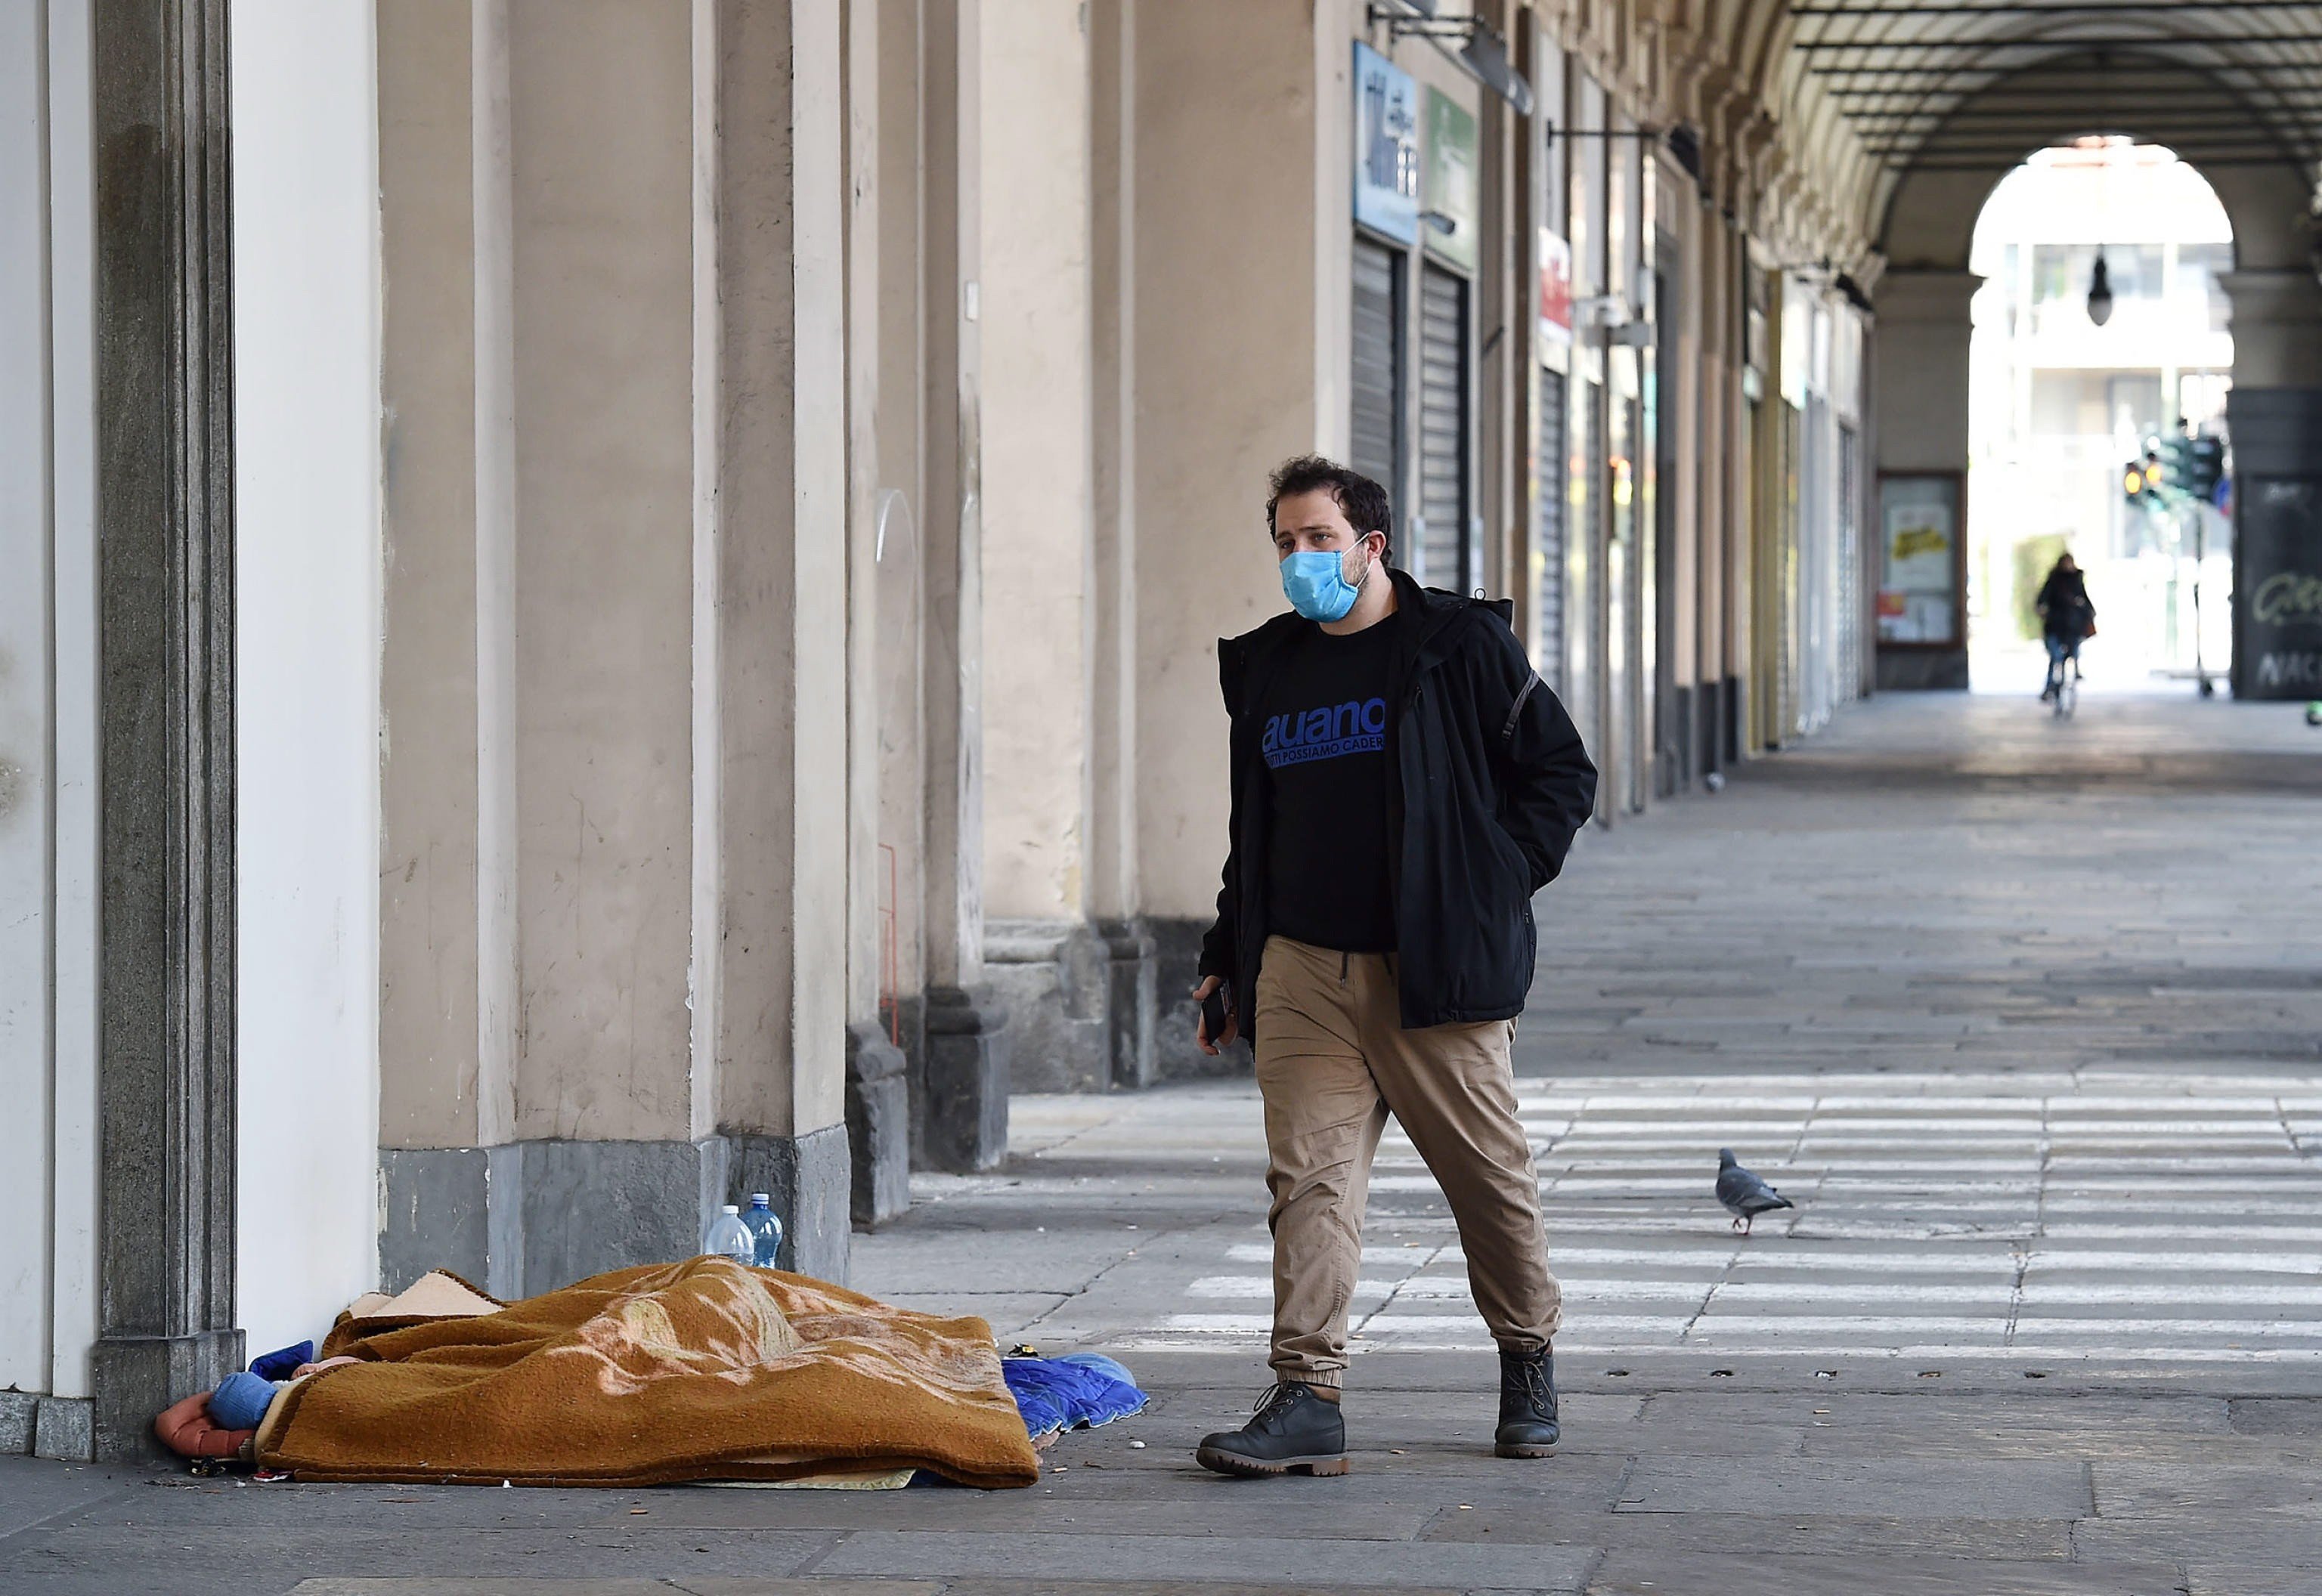 A man wearing a mask walks past a street sleeper in Turin, Italy, on March 17. Photo: EPA-EFE